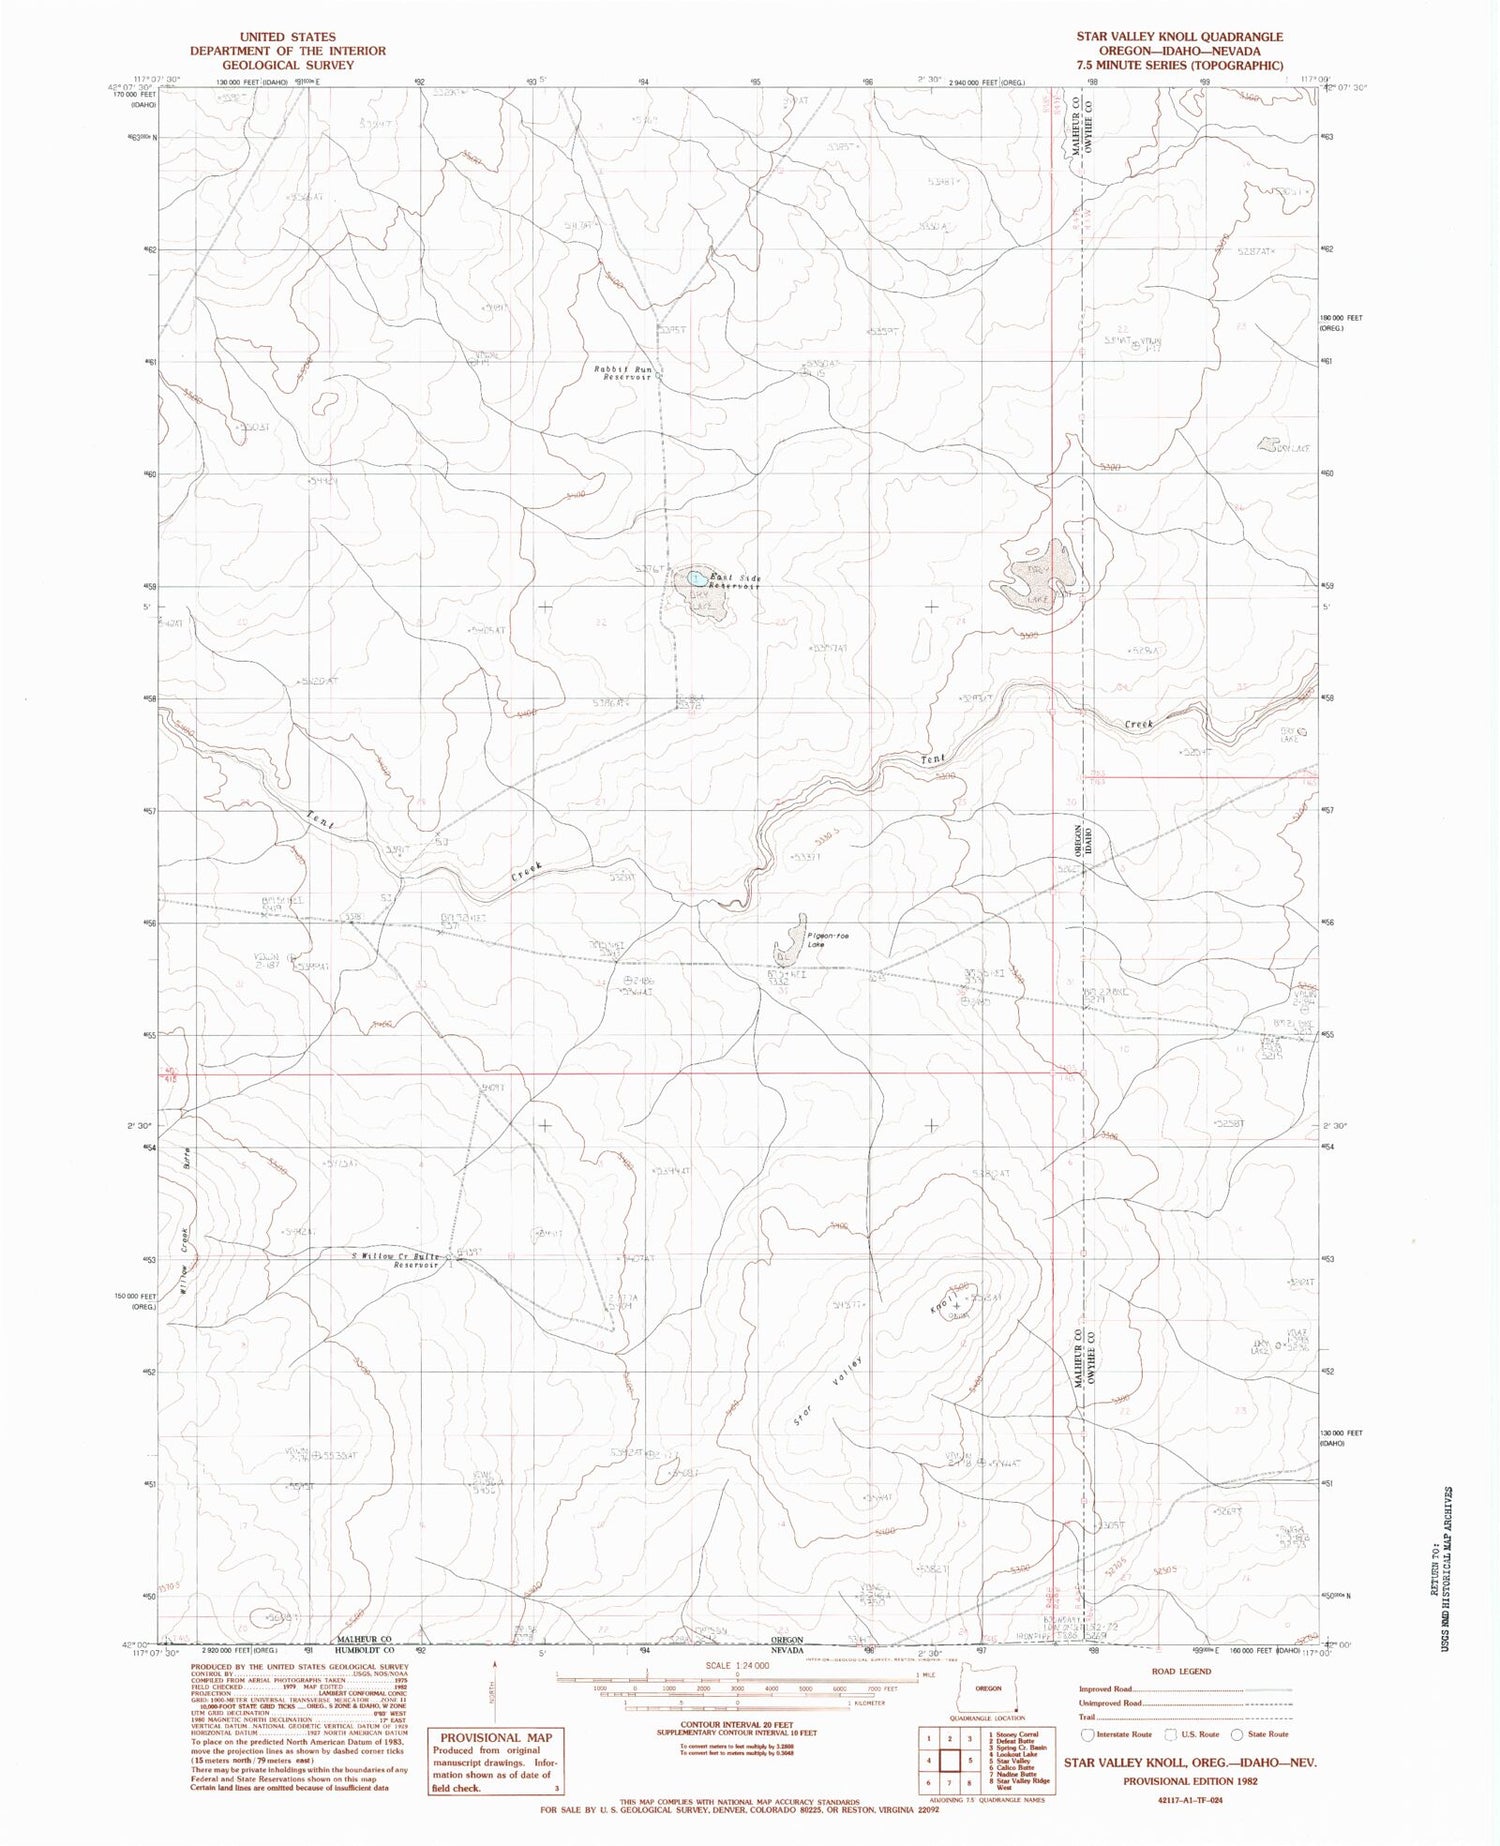 Classic USGS Star Valley Knoll Oregon 7.5'x7.5' Topo Map Image